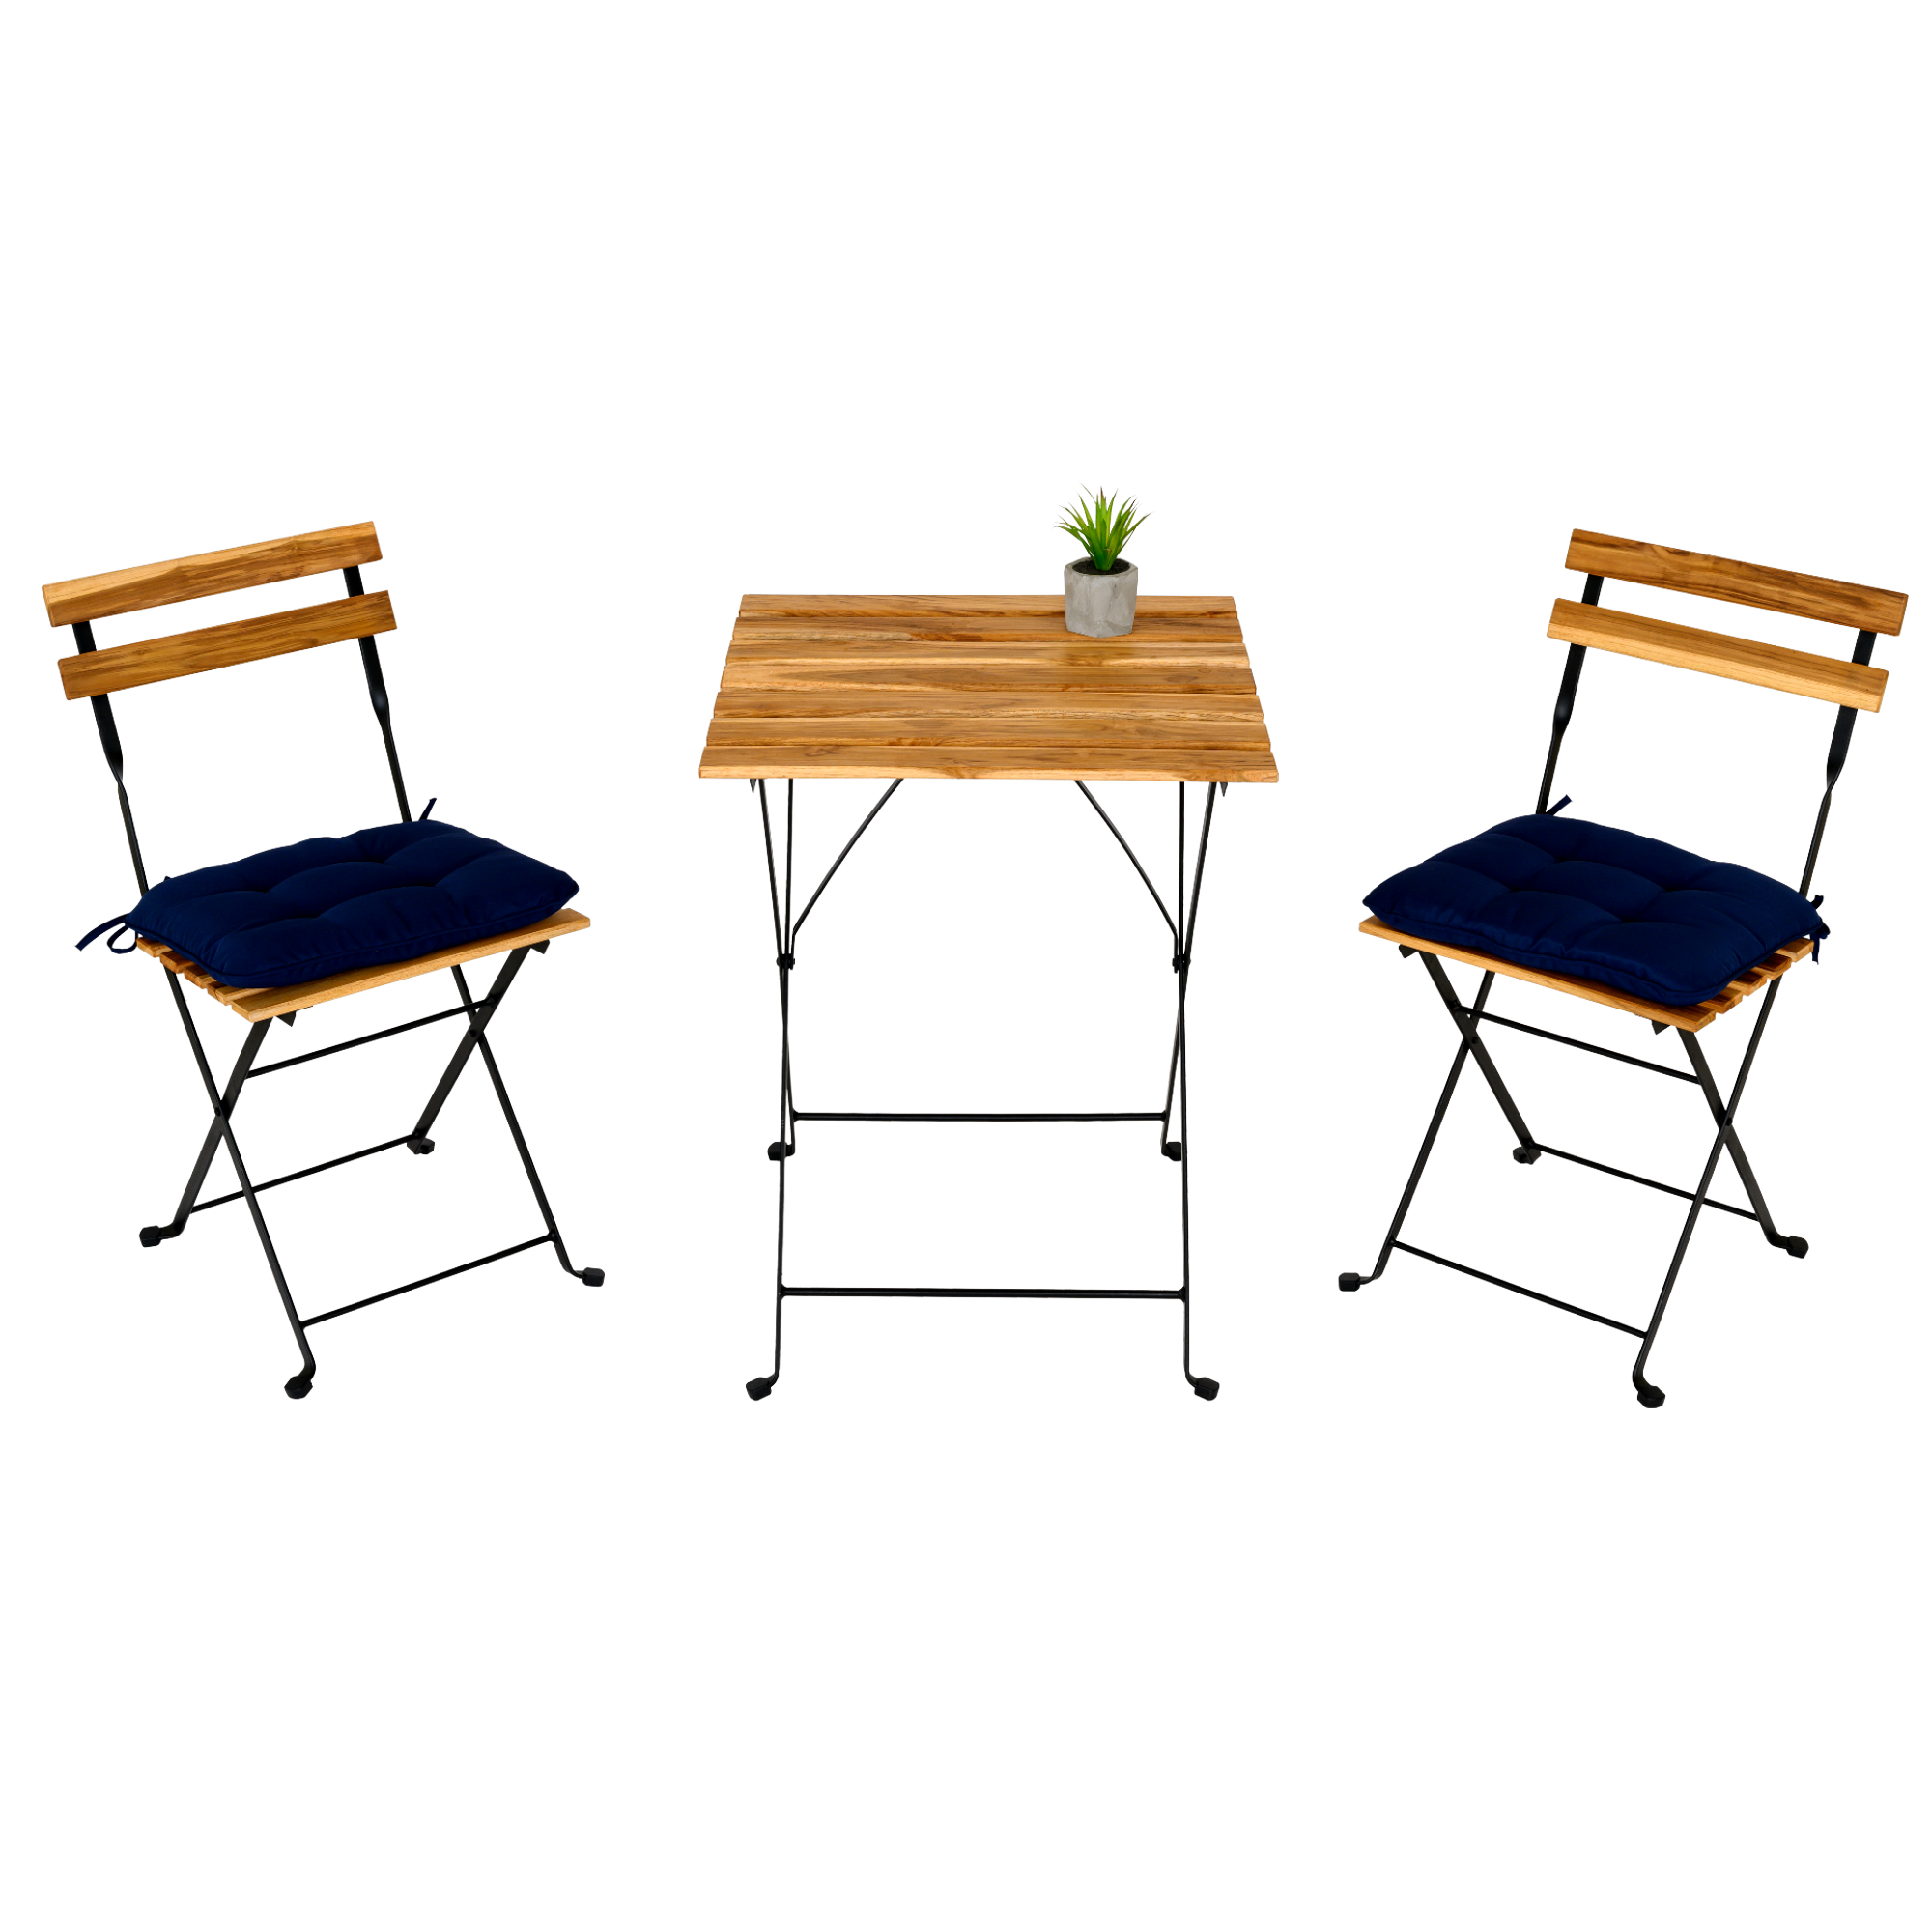 BEEFURNI Solid Teak Wood Bistro Set Folding Table And Chair Set Power Coating Frame Patio Set With Waterproof Navy Cushion-Boyel Living